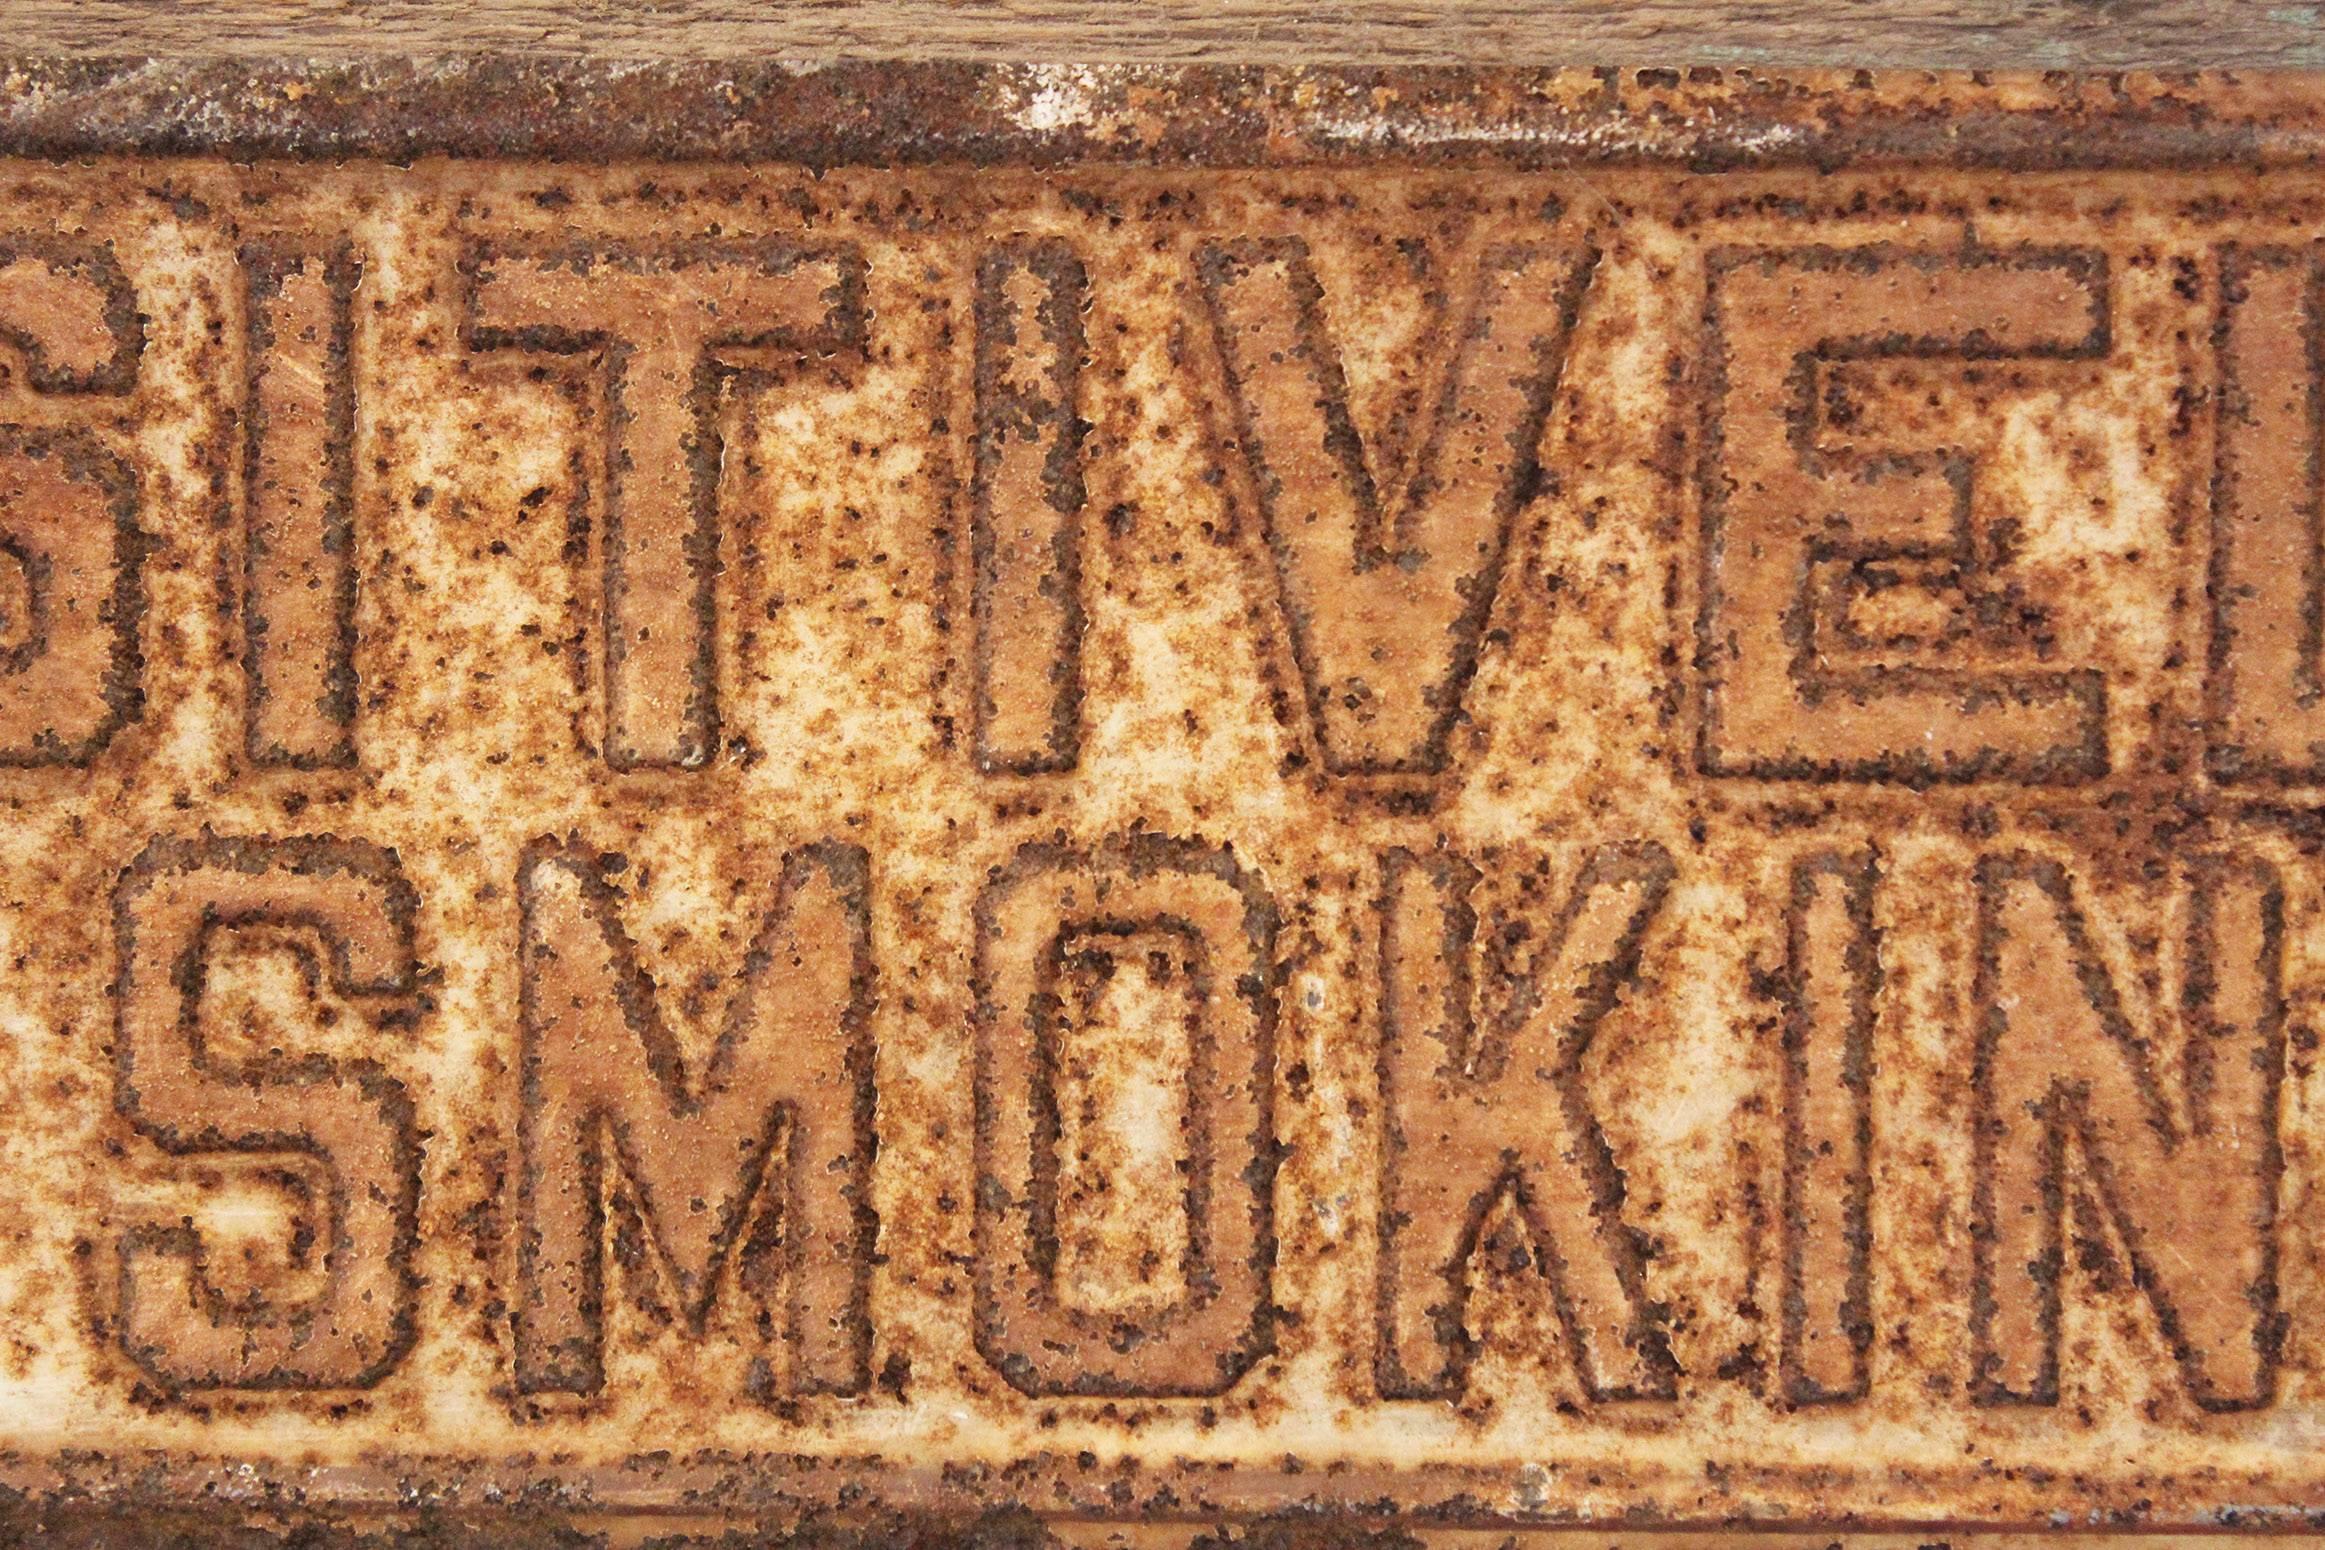 POSITIVELY NO SMOKING Vintage Metal Sign on Painted Wood Block 1